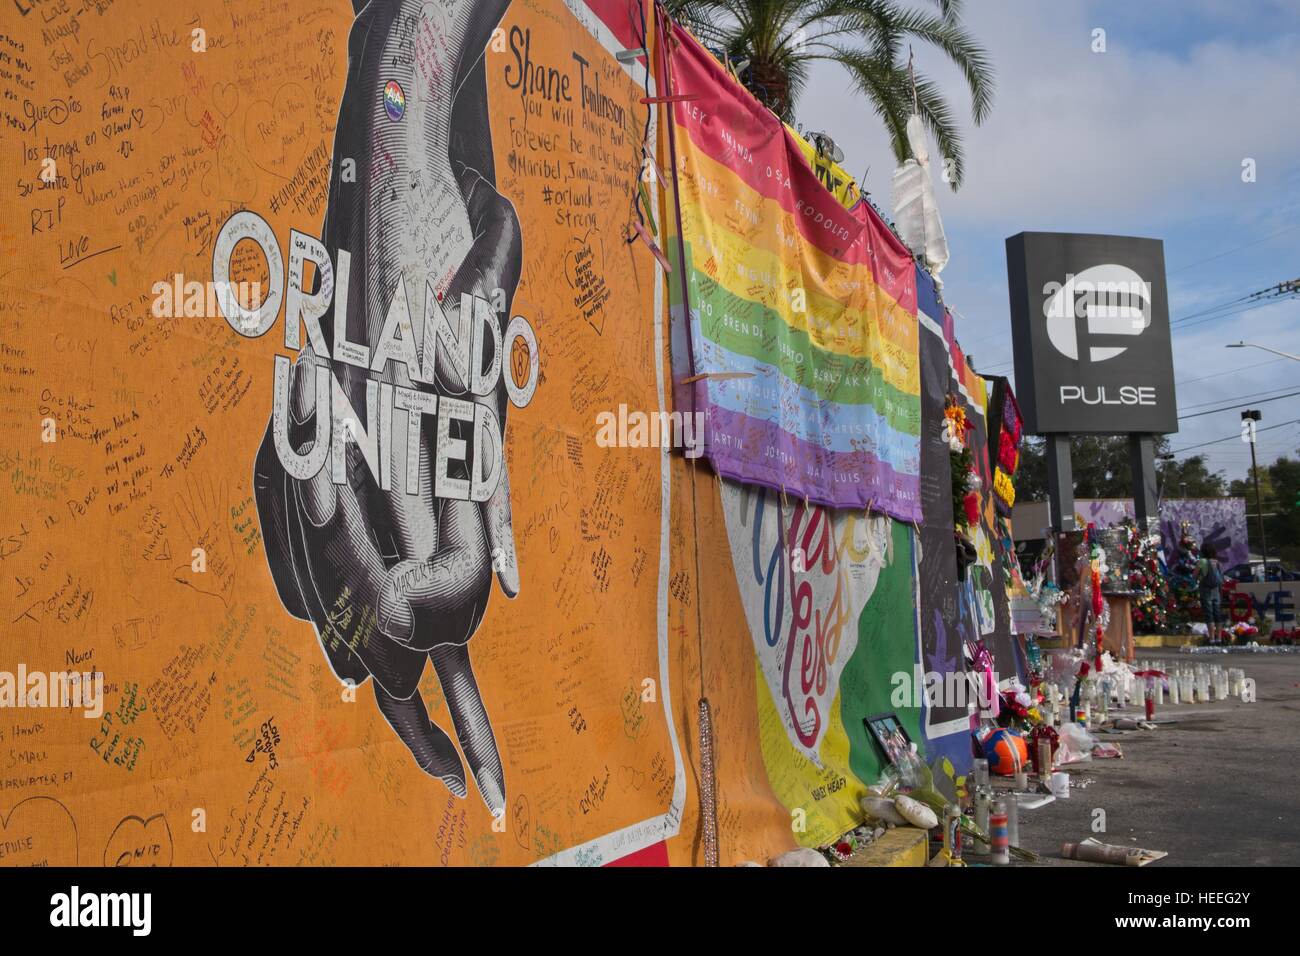 Tributes are left at a makeshift memorial around the Pulse Nightclub December 18, 2016 in Orlando, Florida. On June 12, 2016 49 people were killed and 53 injured in the deadliest mass shooting by a single gunman in U.S. history, and the deadliest terrorist attack on U.S. soil since the events of September 11, 2001. Stock Photo